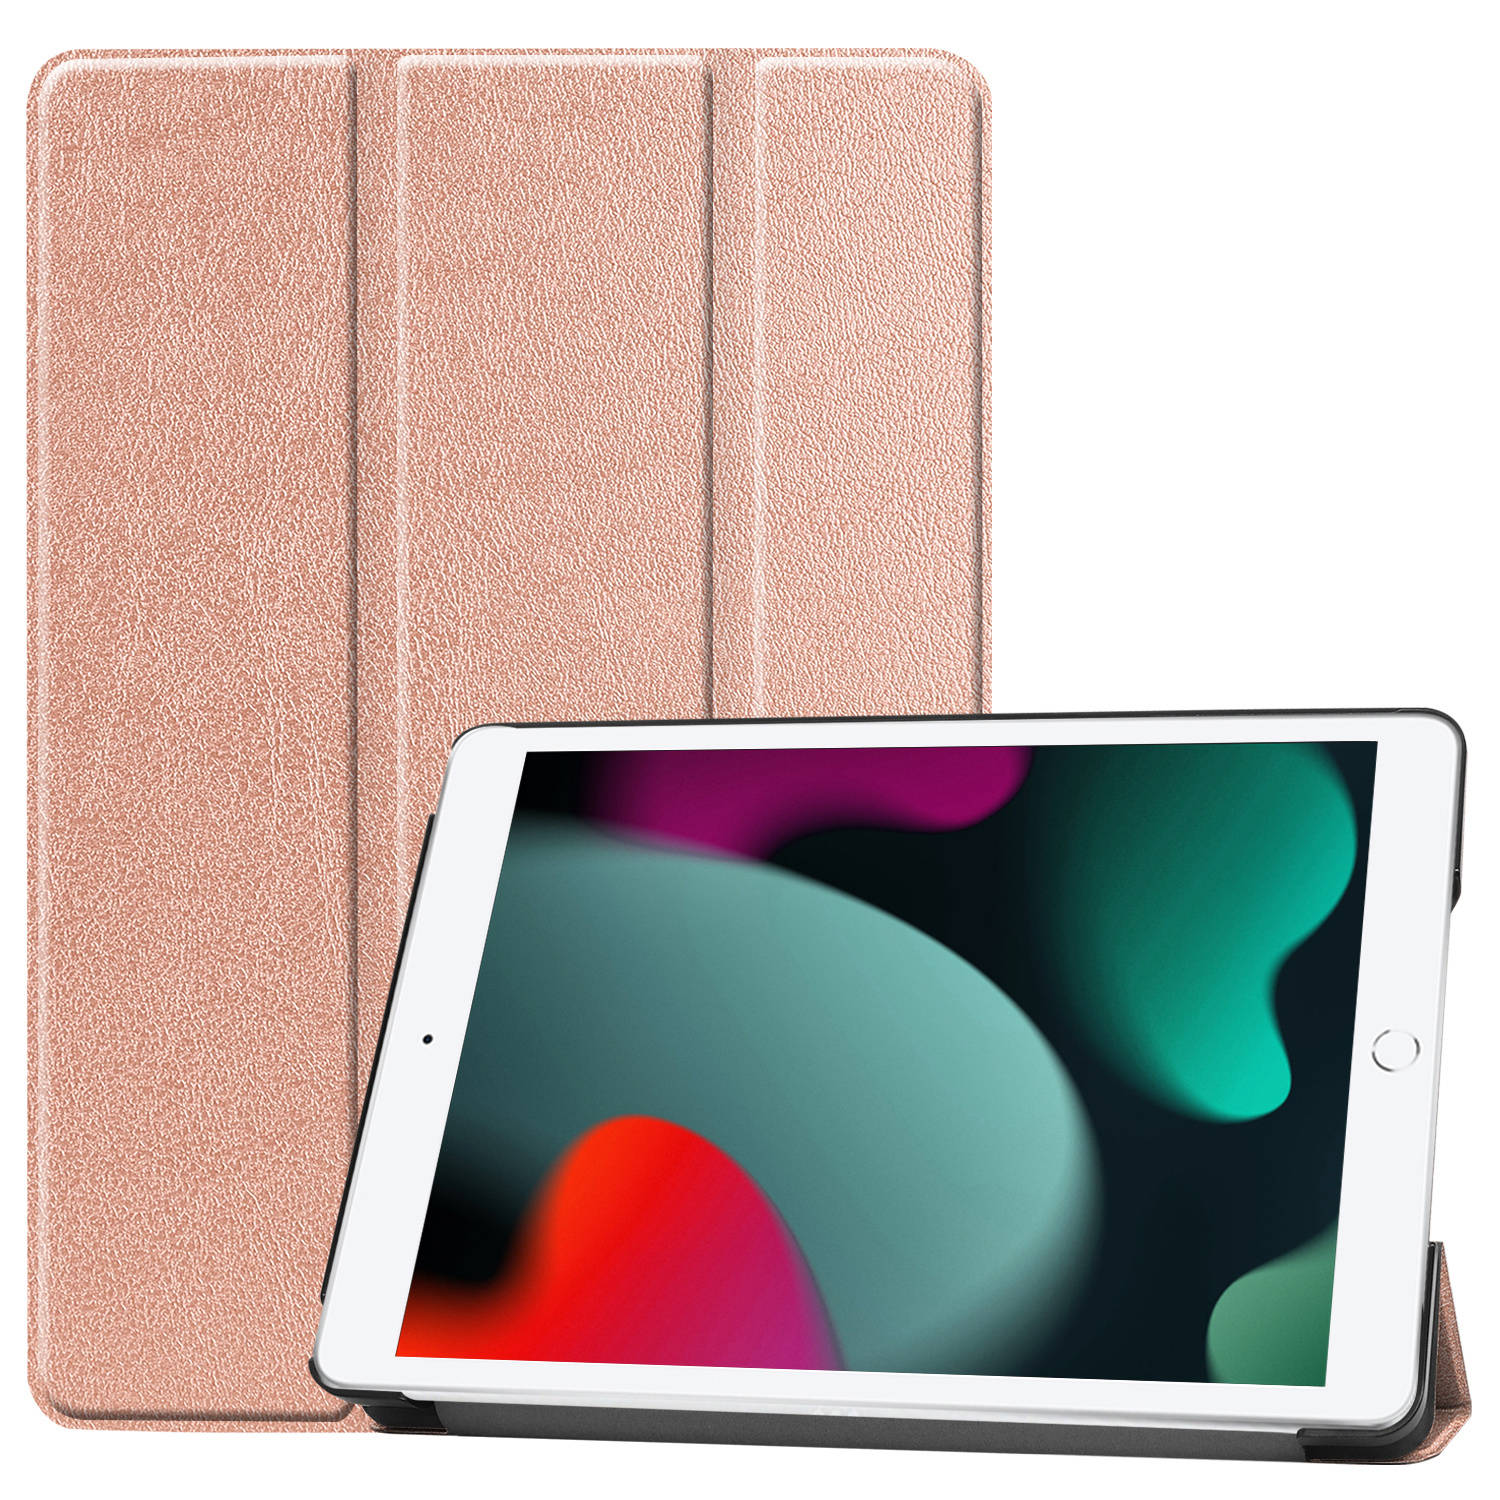 Basey iPad 10.2 2020 Hoes Book Case Hoesje - iPad 10.2 2020 Hoesje Hard Cover Case Hoes - Rose Goud